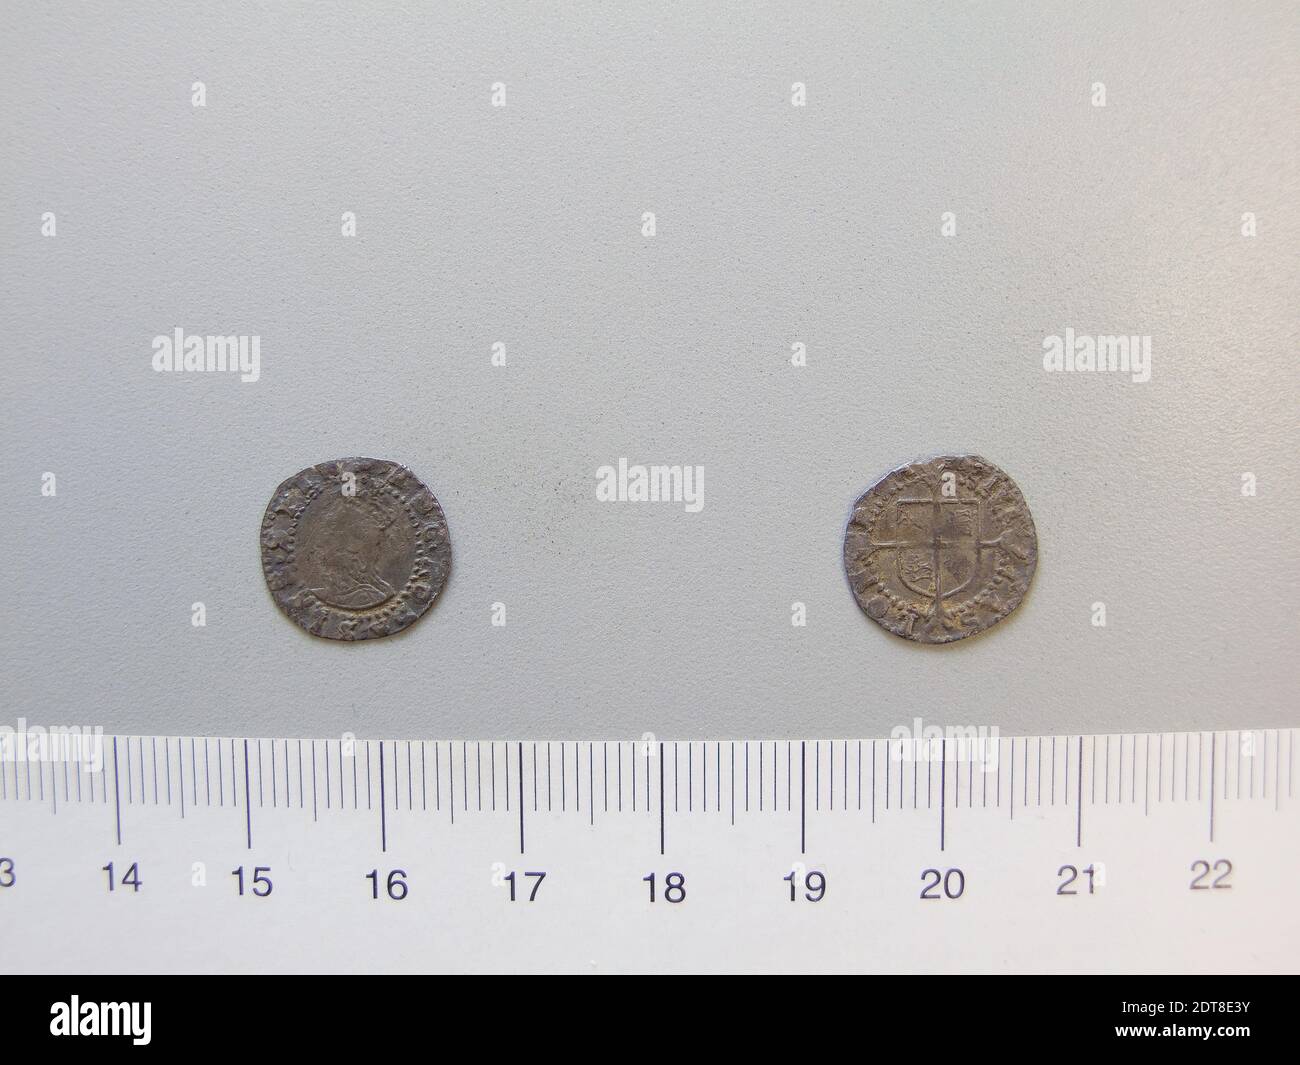 Ruler: Elizabeth I, Queen of England, British, 1533–1603, ruled 1558–1603, Mint: London, 1 Penny of Elizabeth I, Queen of England from London, Silver, 0.49 g, 5:00, 13 mm, Made in London, England, British, 17th century, Numismatics Stock Photo